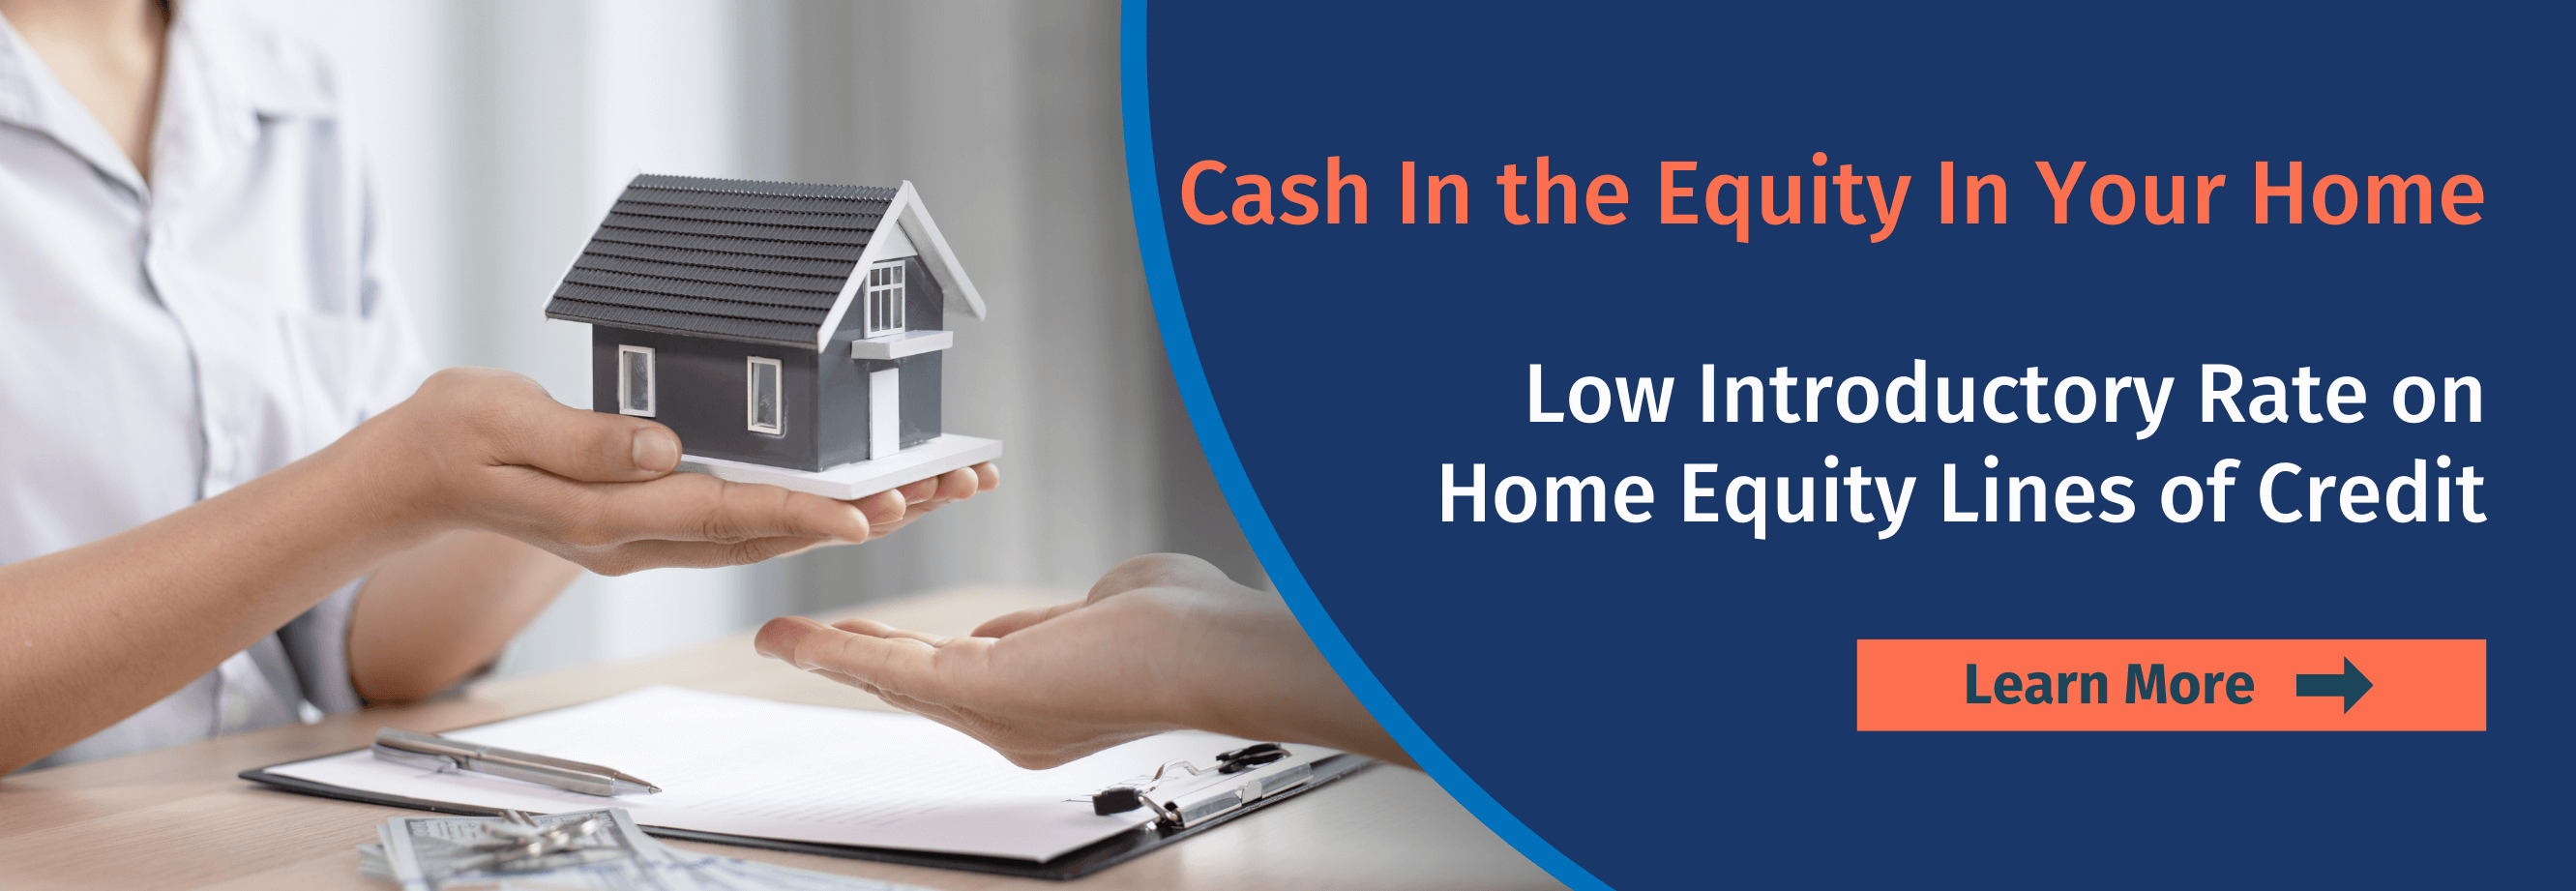 Home Equity Introductory Rate